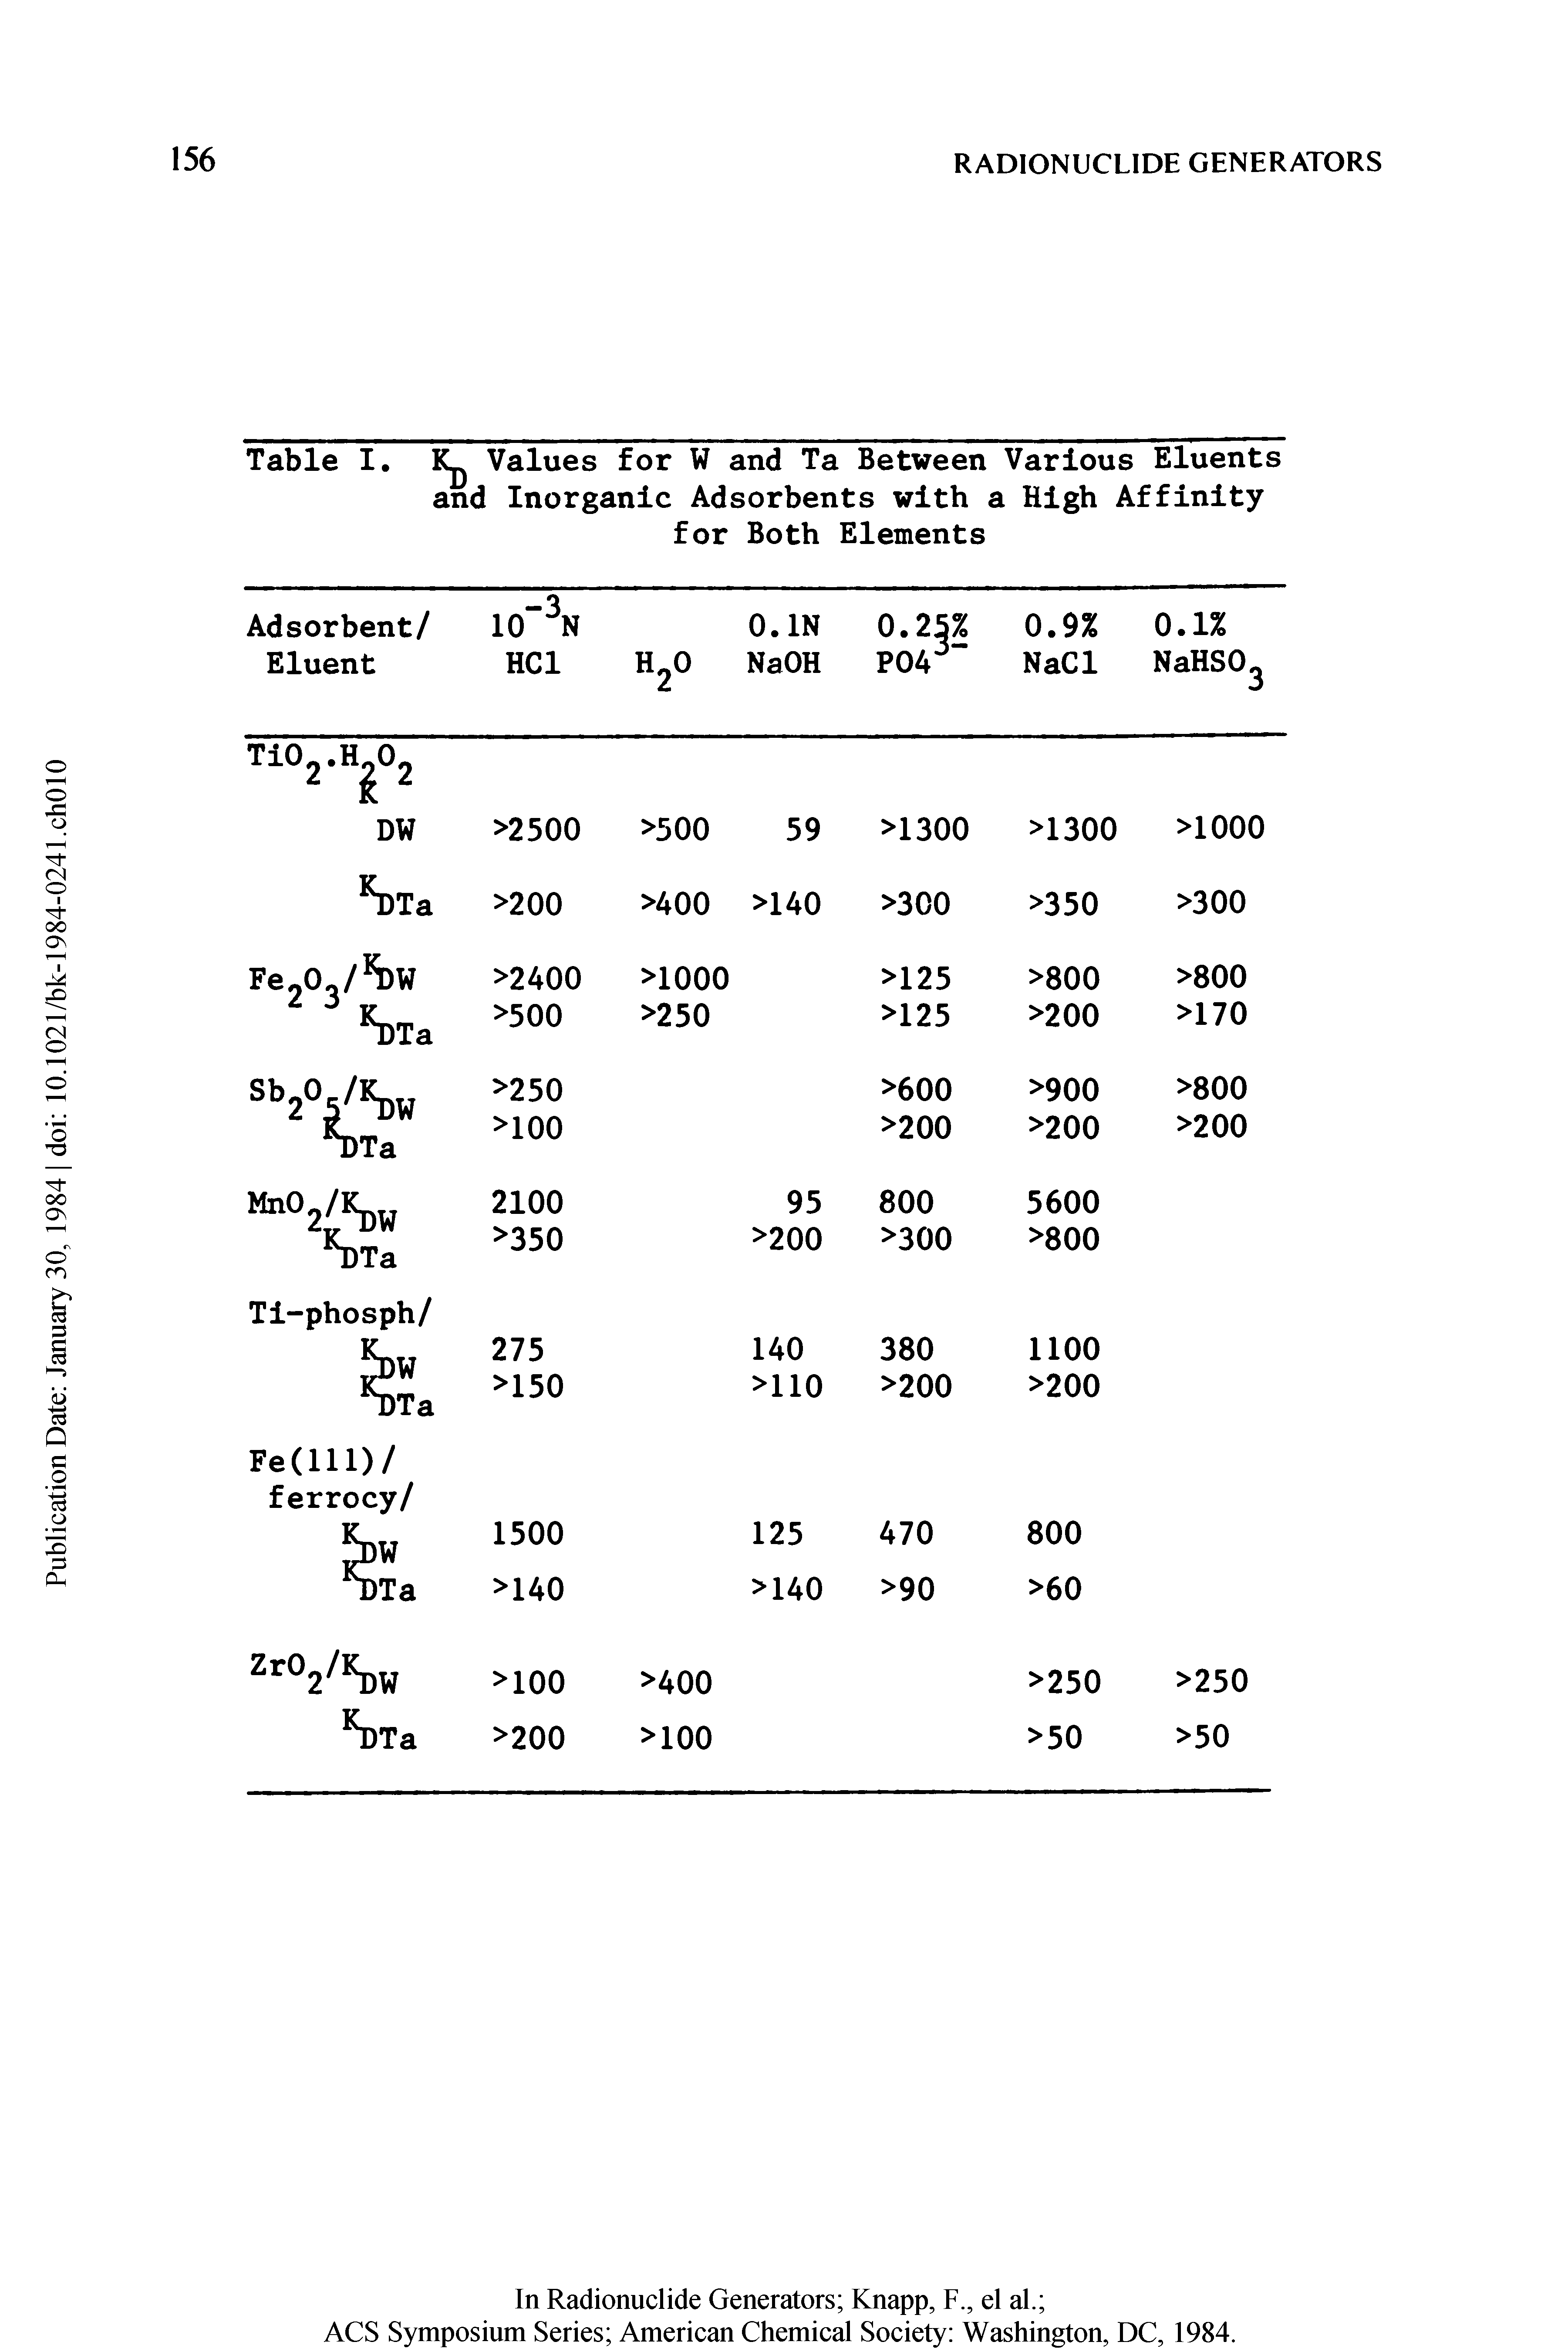 Table I. Values for W and Between Various Eluents and Inorganic Adsorbents with a High Affinity for Both Elements ...